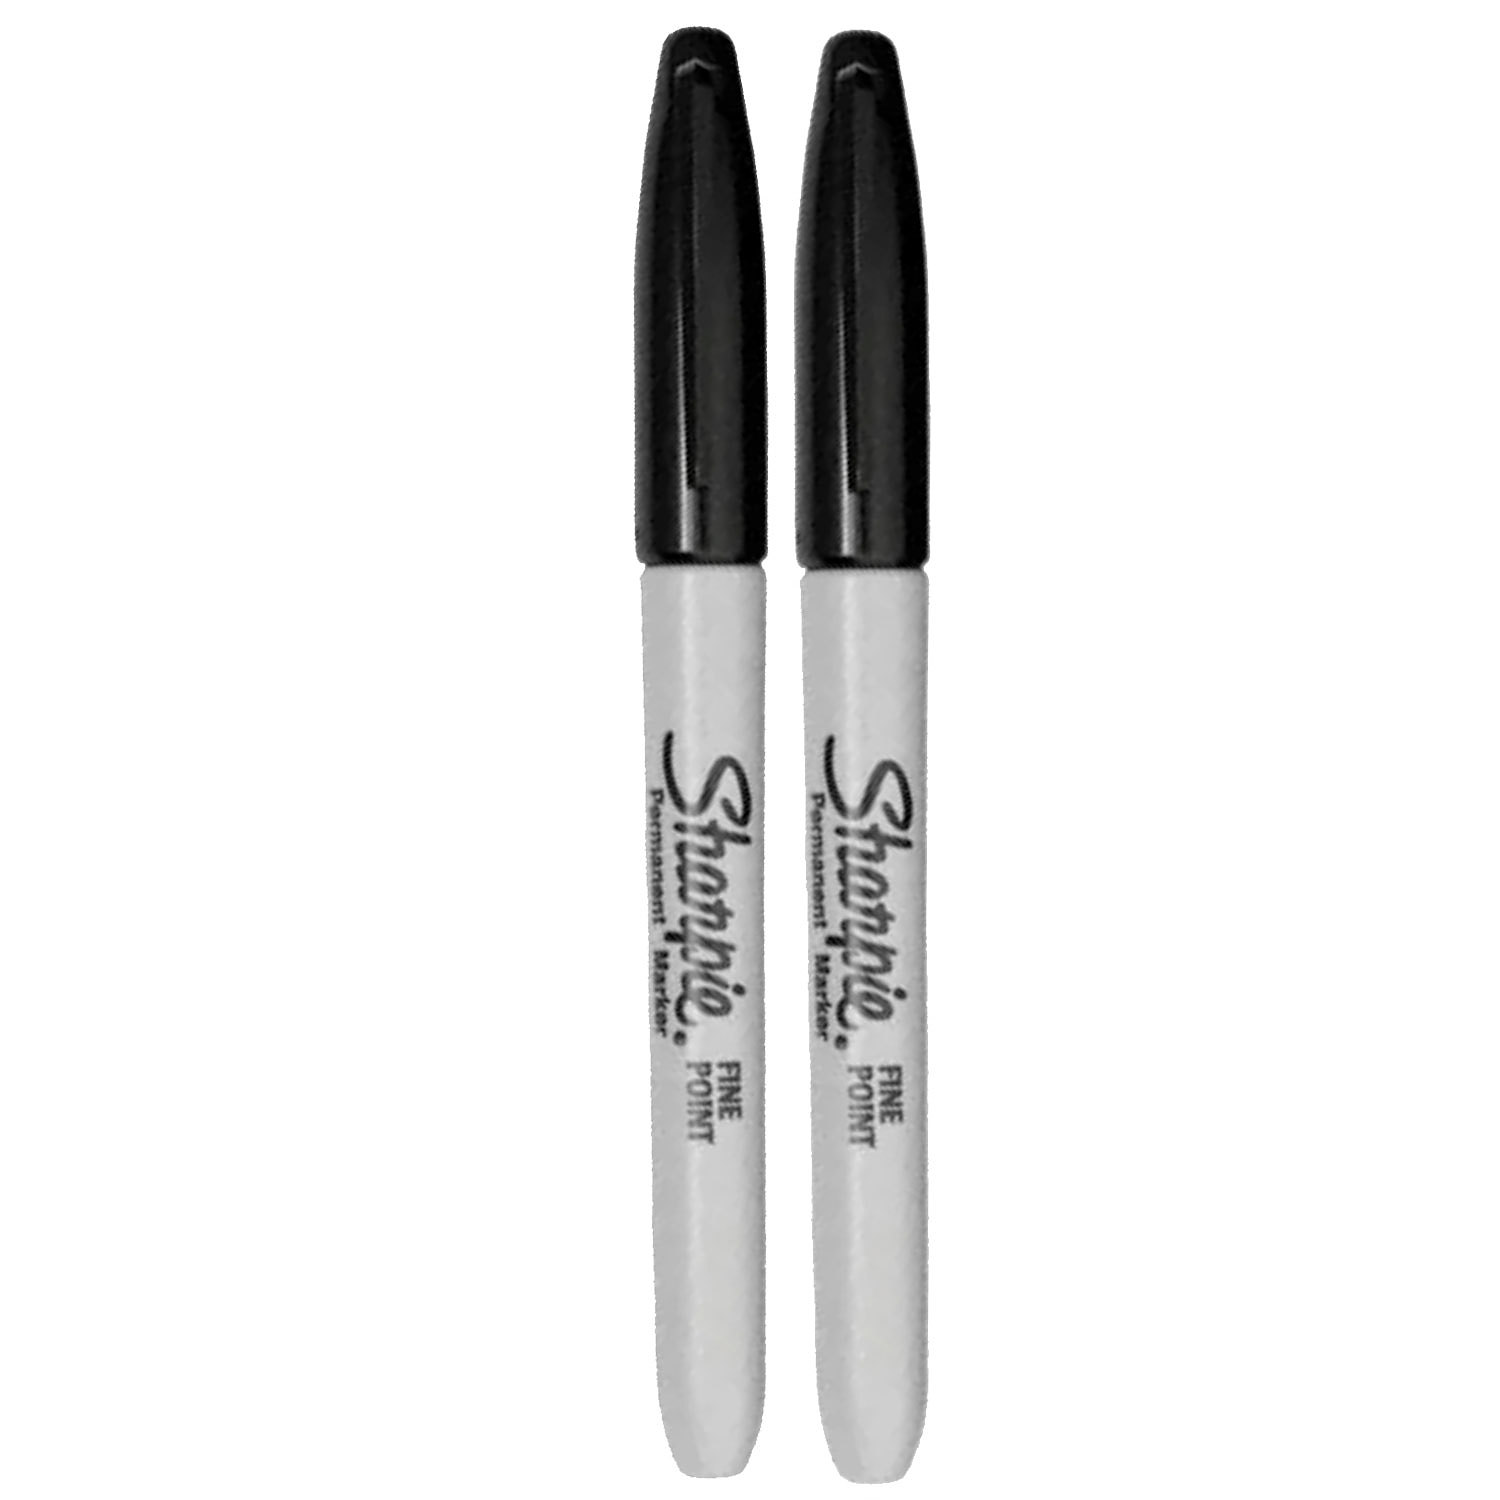 Sharpie - Fine point permanent markers, black, pk. of 2